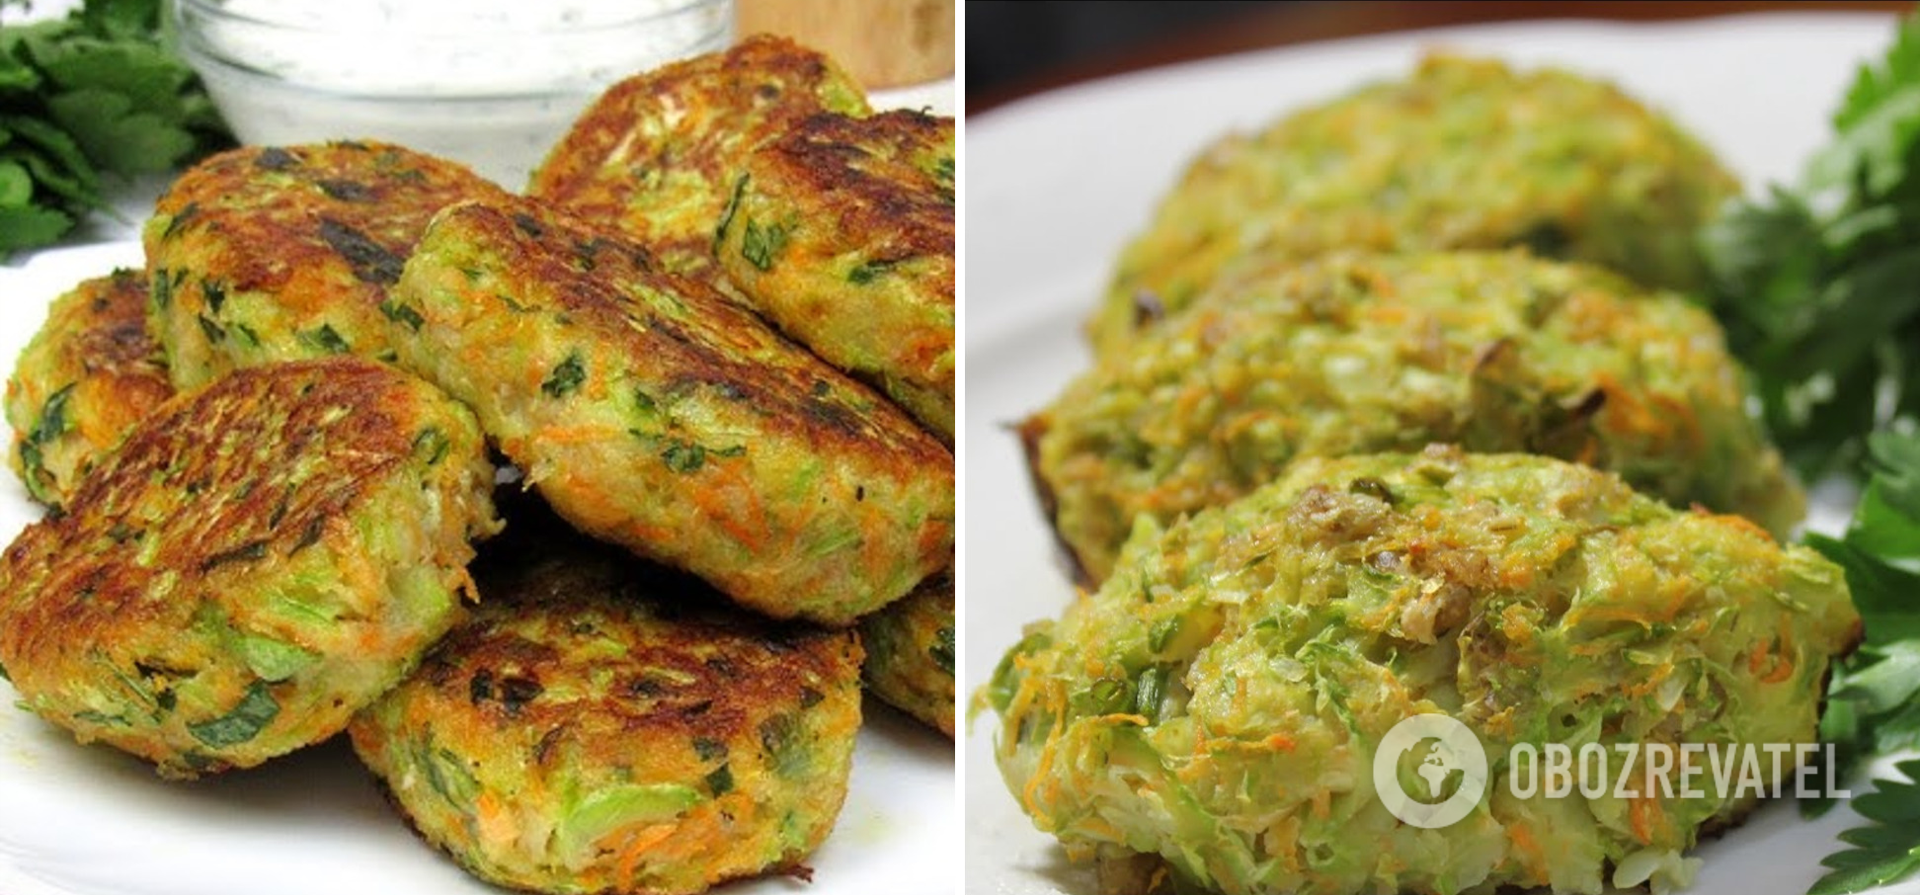 Zucchini cutlets in the oven